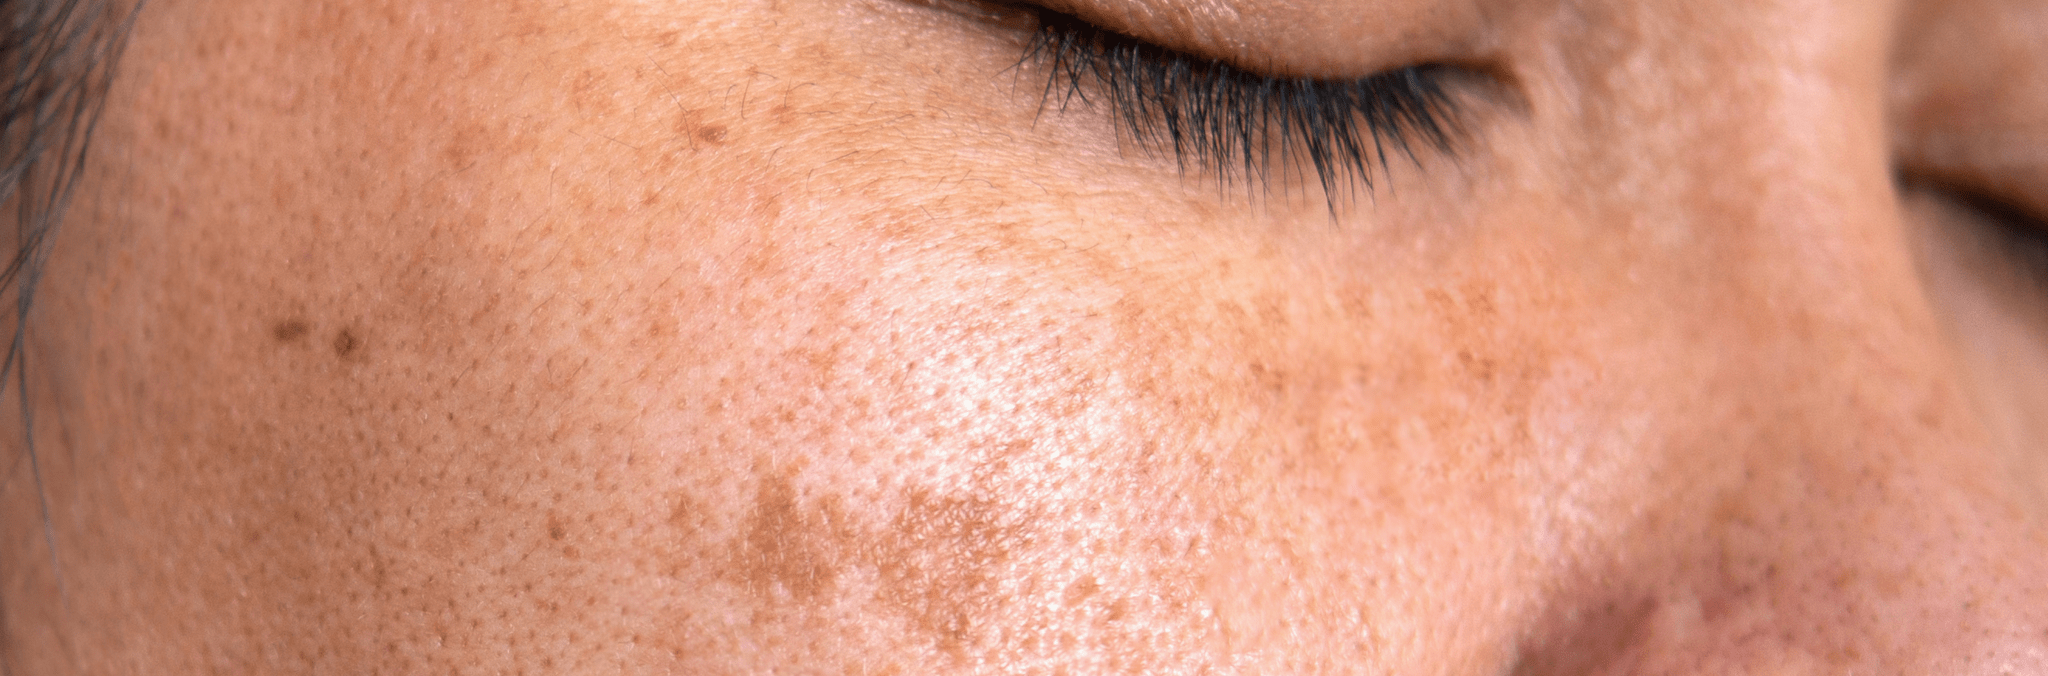 Why do dark spots surface as we age? - cocokind